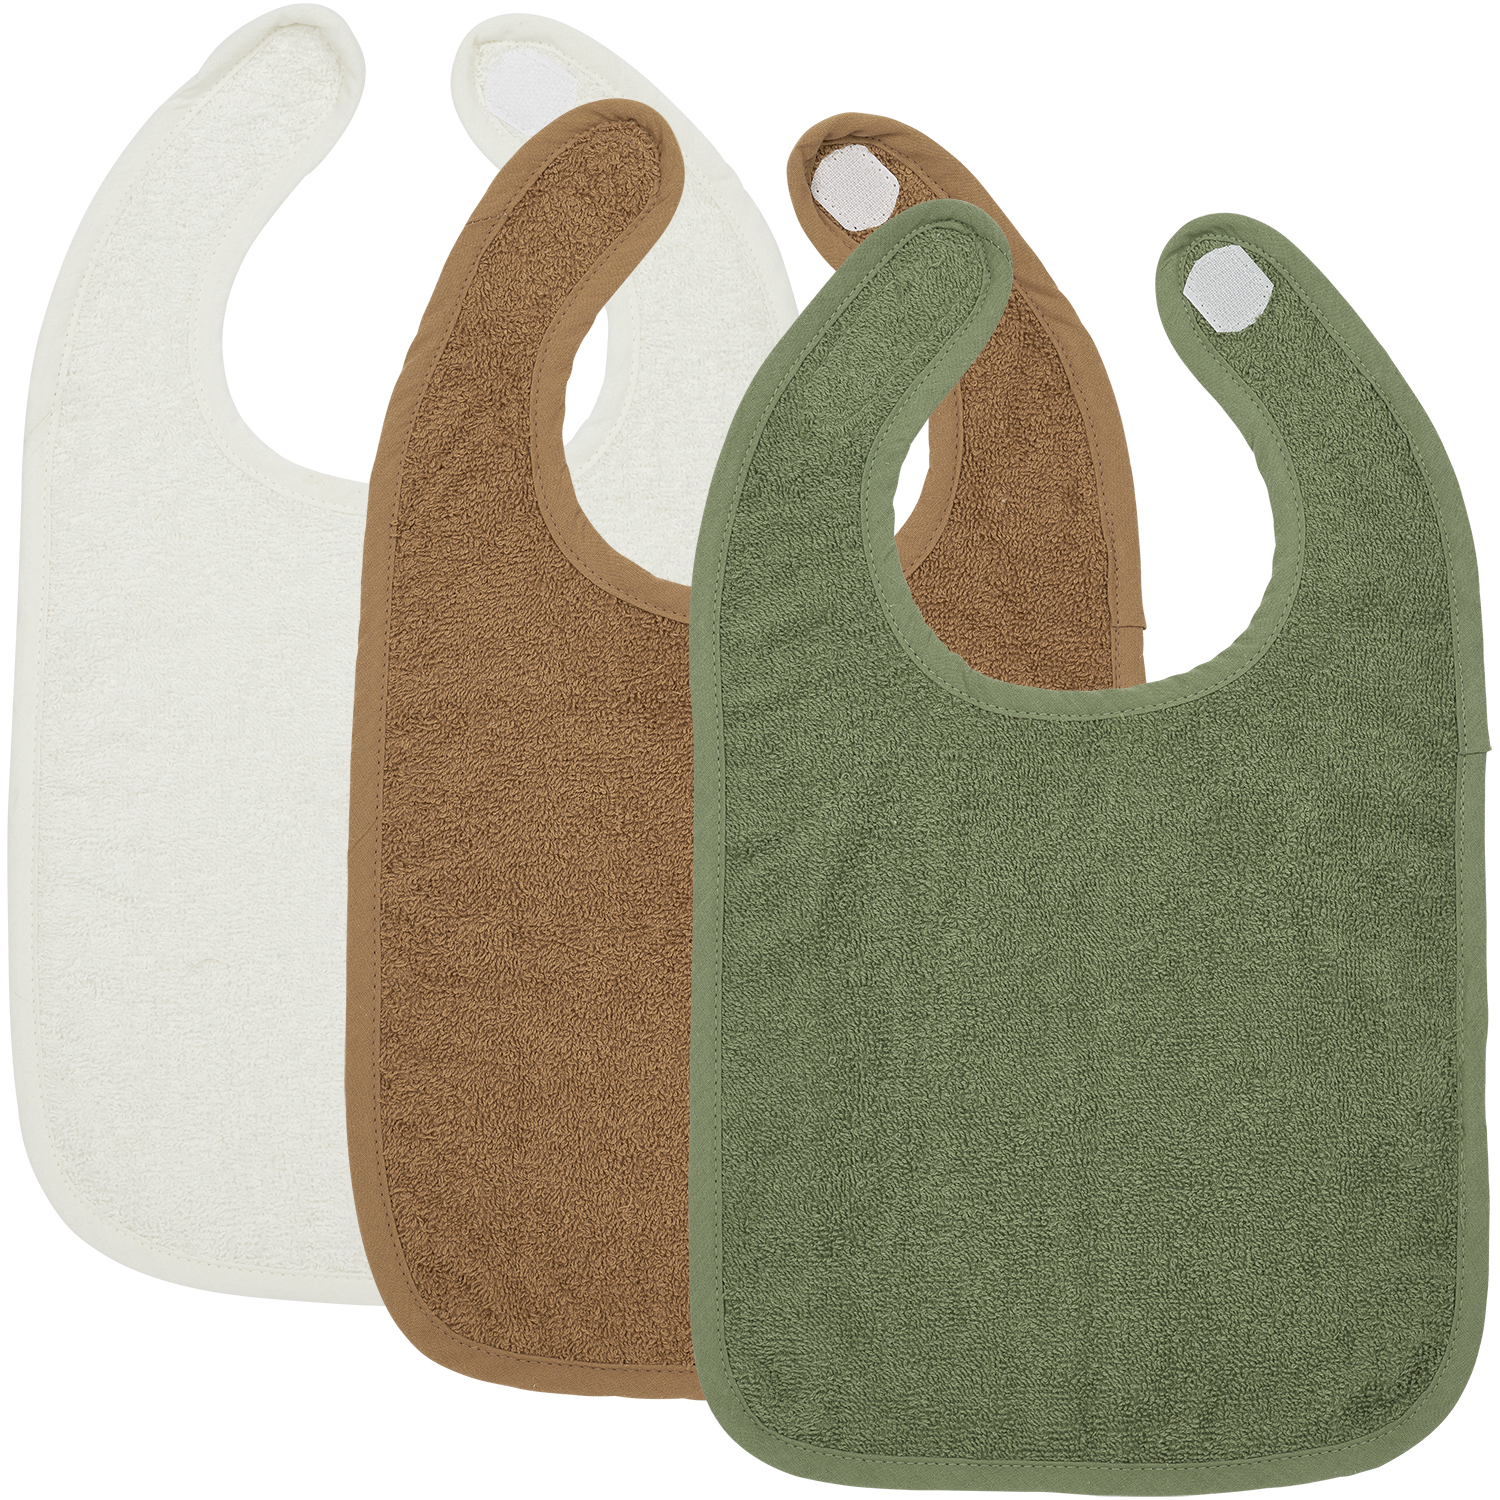 Bib 3-pack terry Uni - offwhite/toffee/forest green